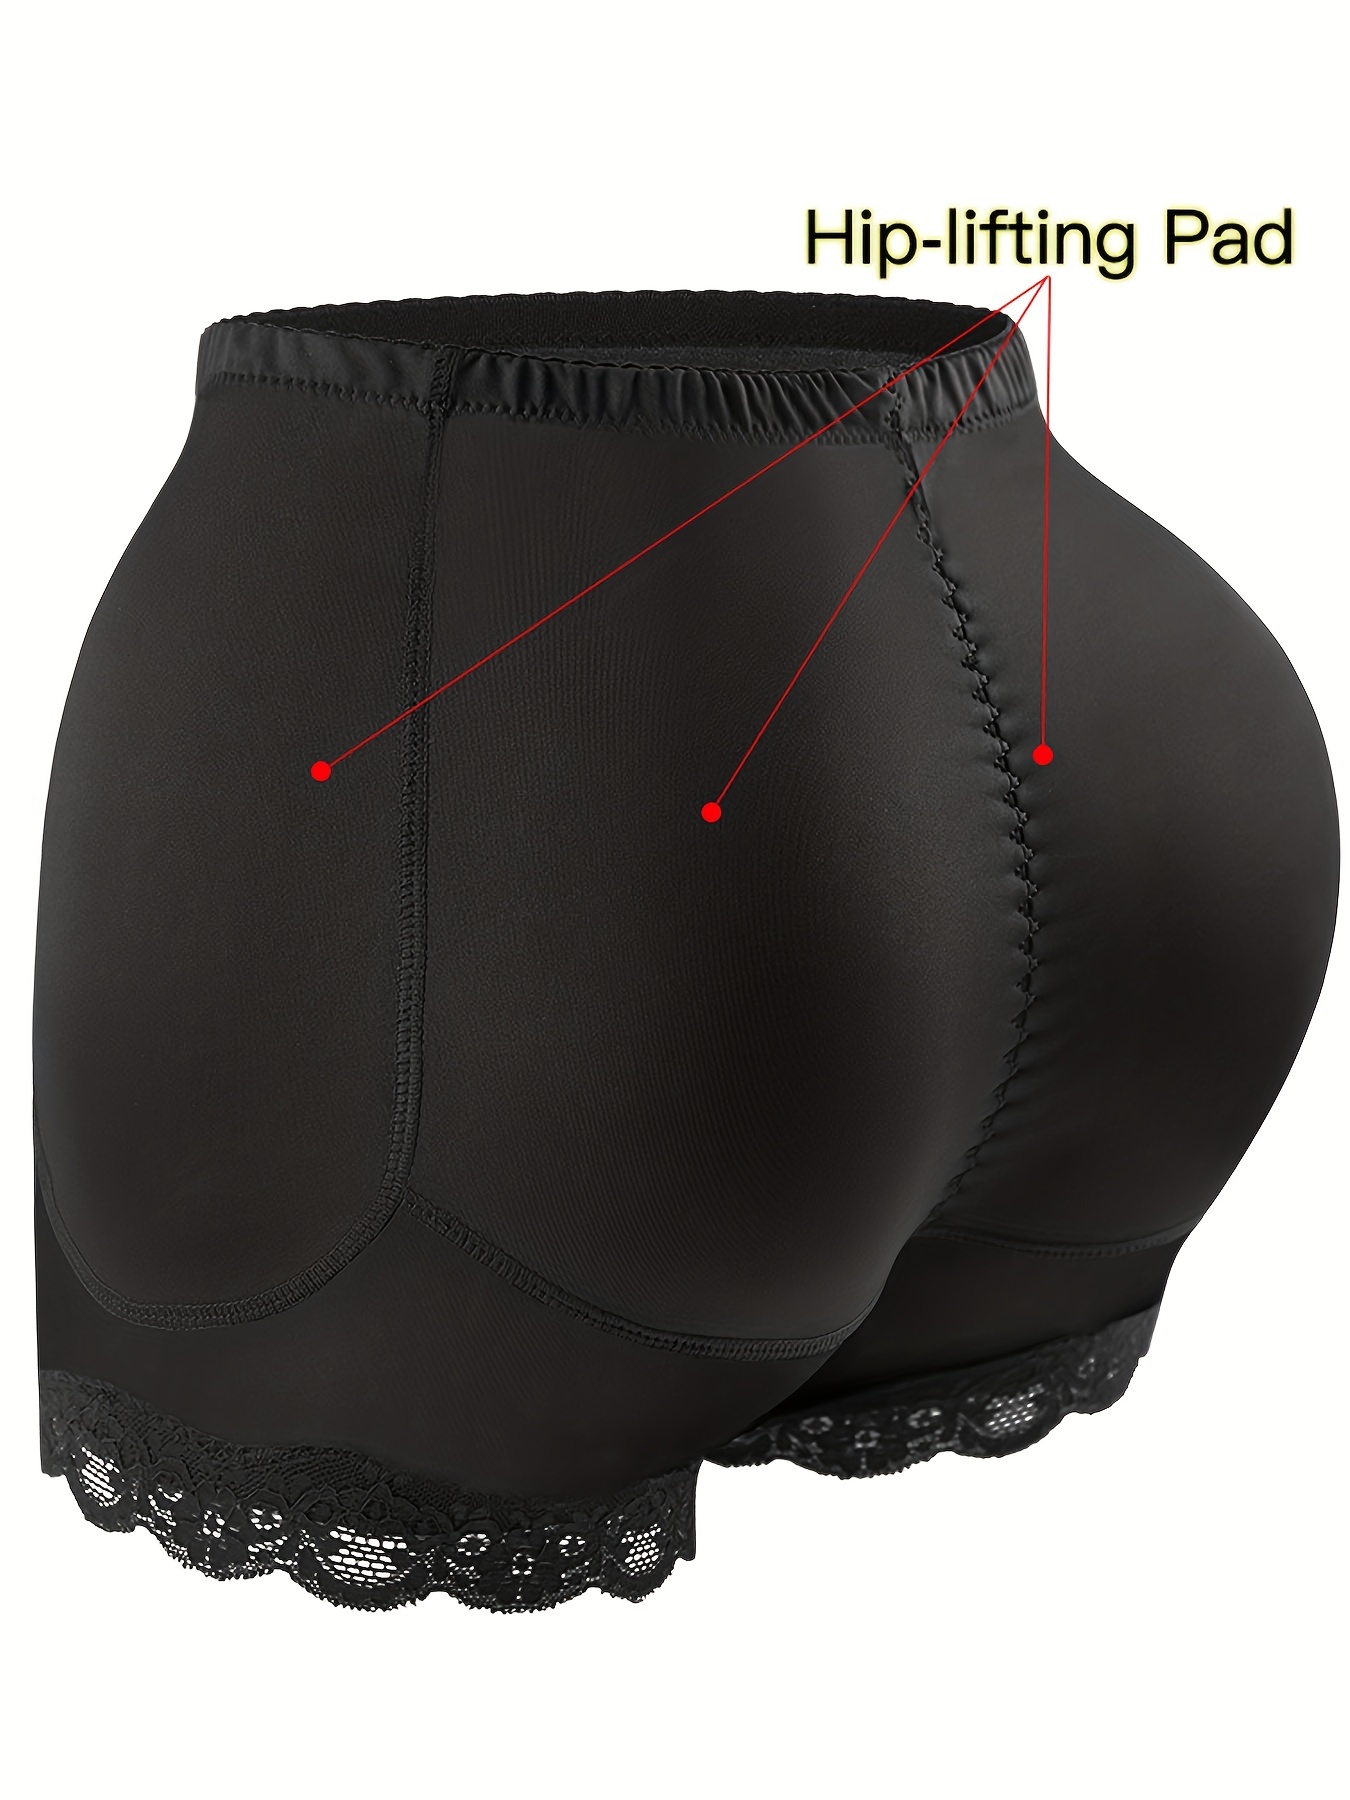 My foam hip/butt pads paired with black leggings and boots for